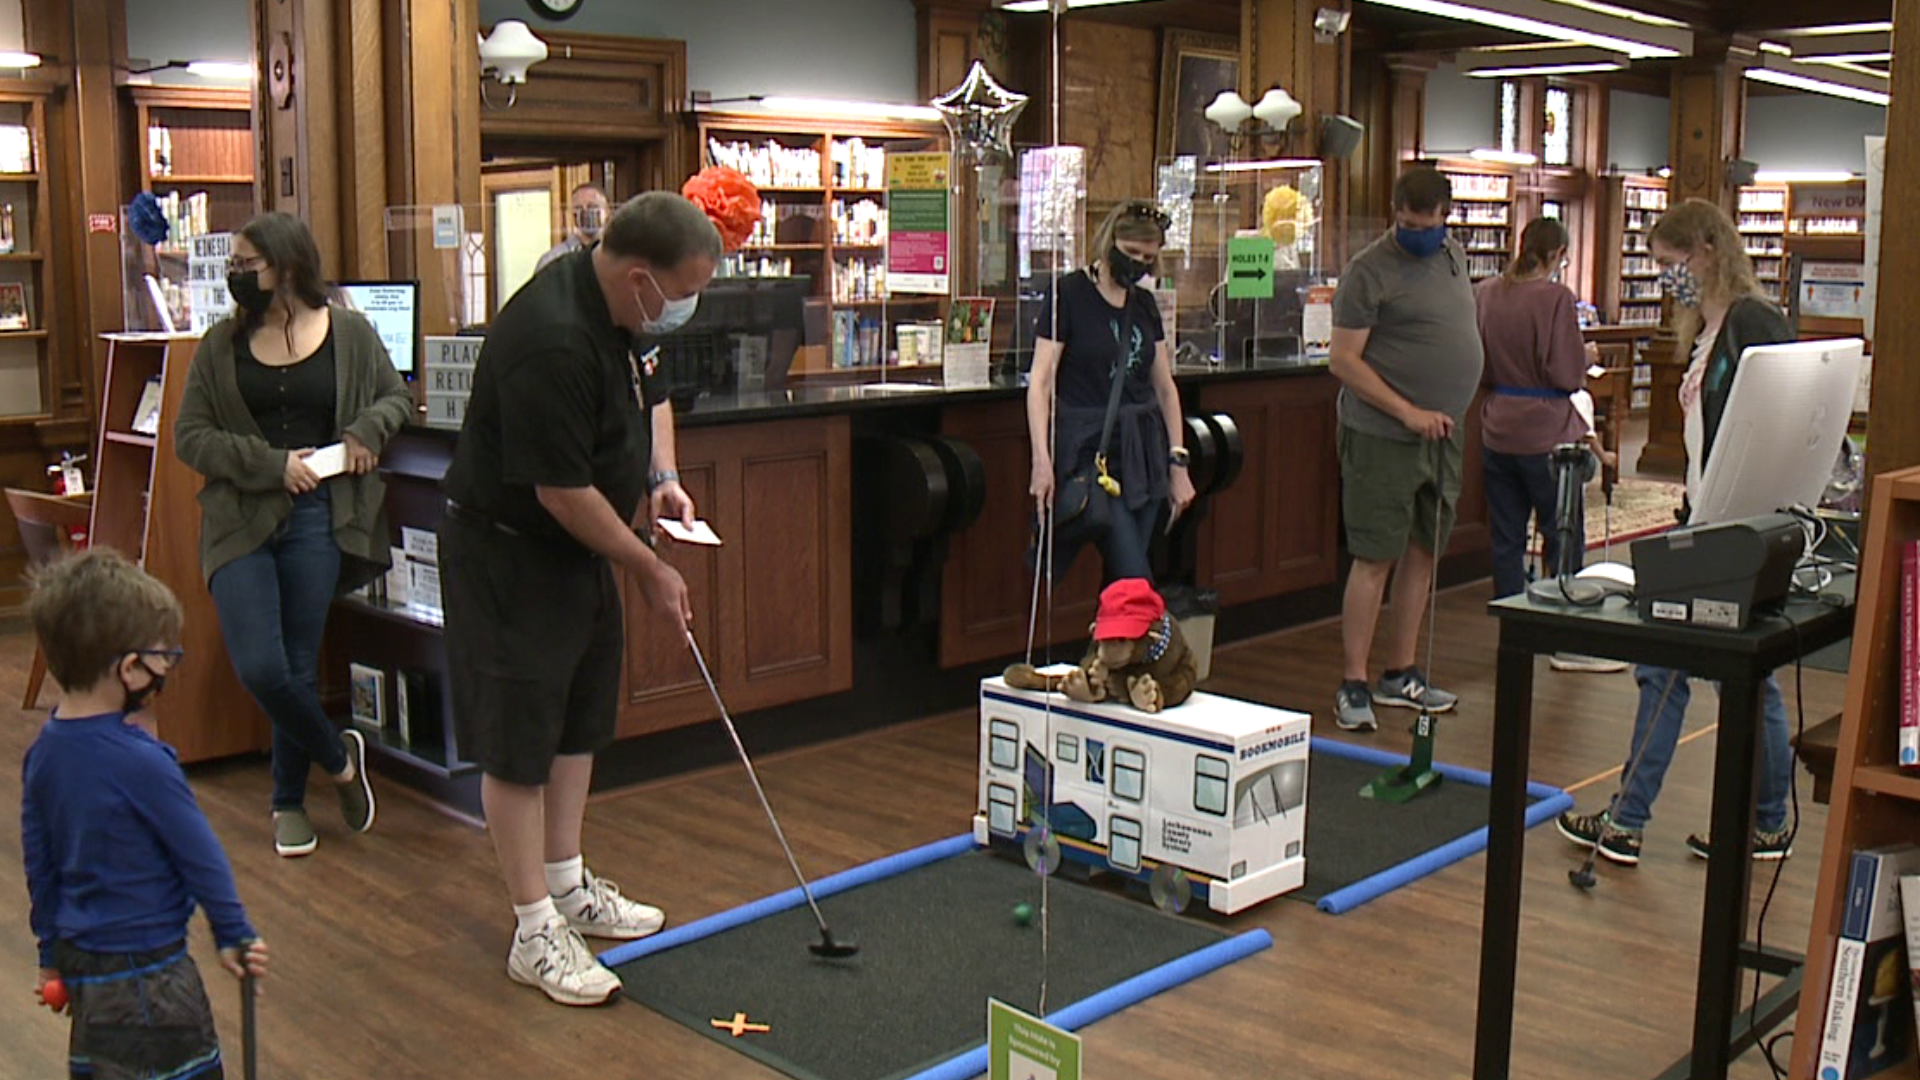 A library was transformed into a mini-golf course over the weekend.